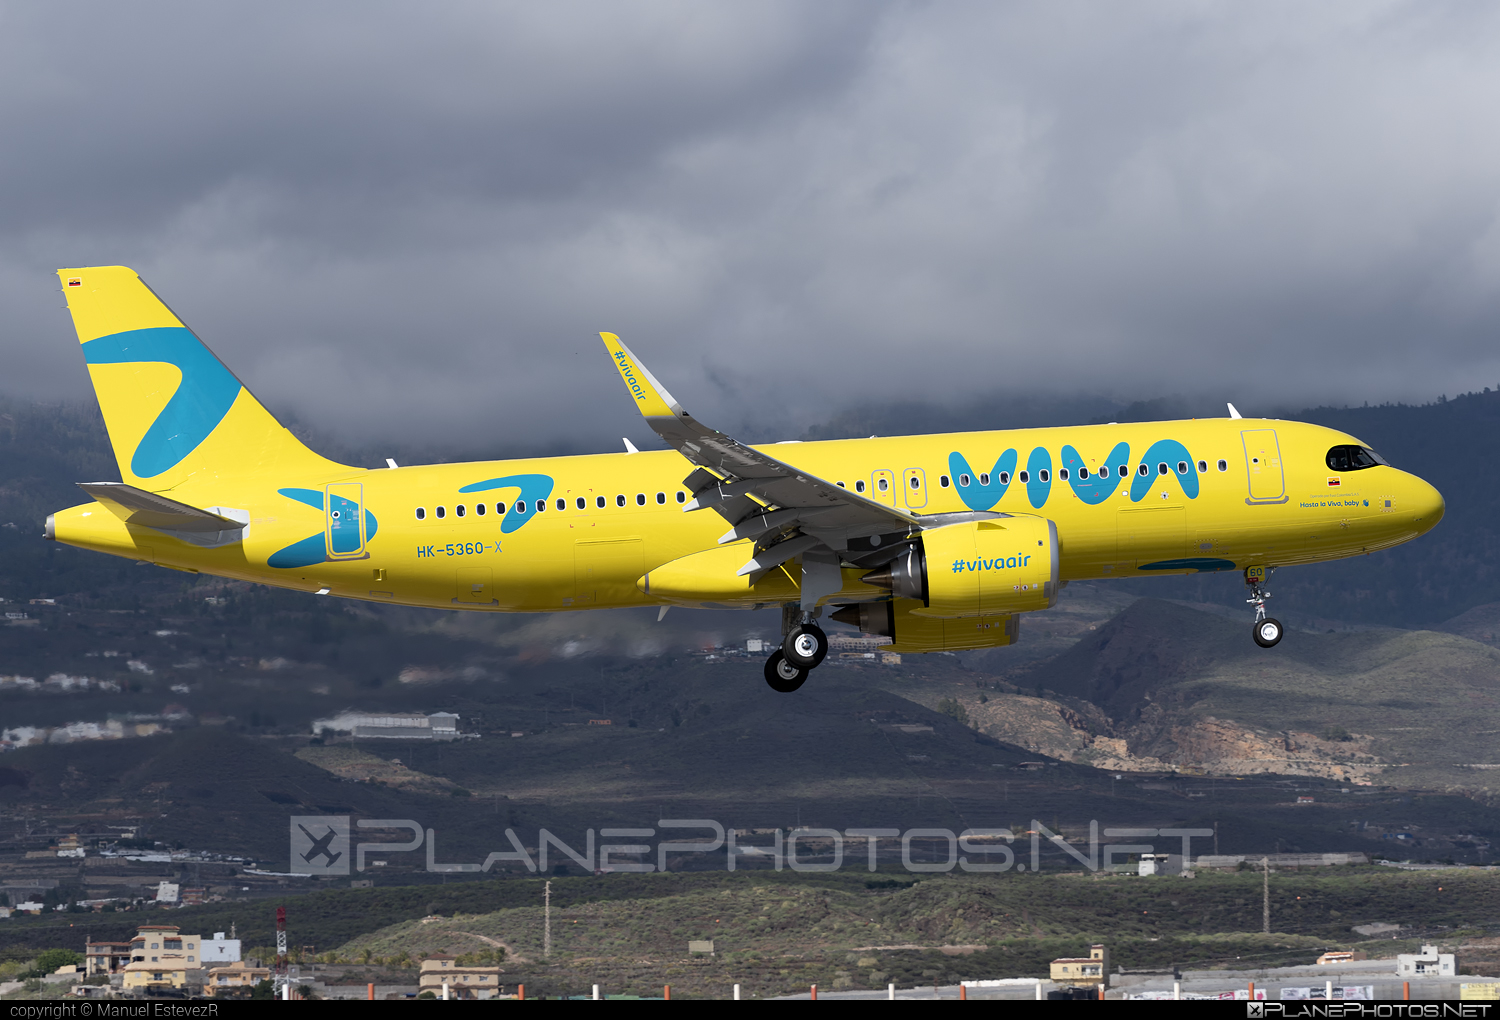 Airbus A320-251N - HK-5360 operated by Viva Air Colombia #a320 #a320family #a320neo #airbus #airbus320 #vivaaircolombia